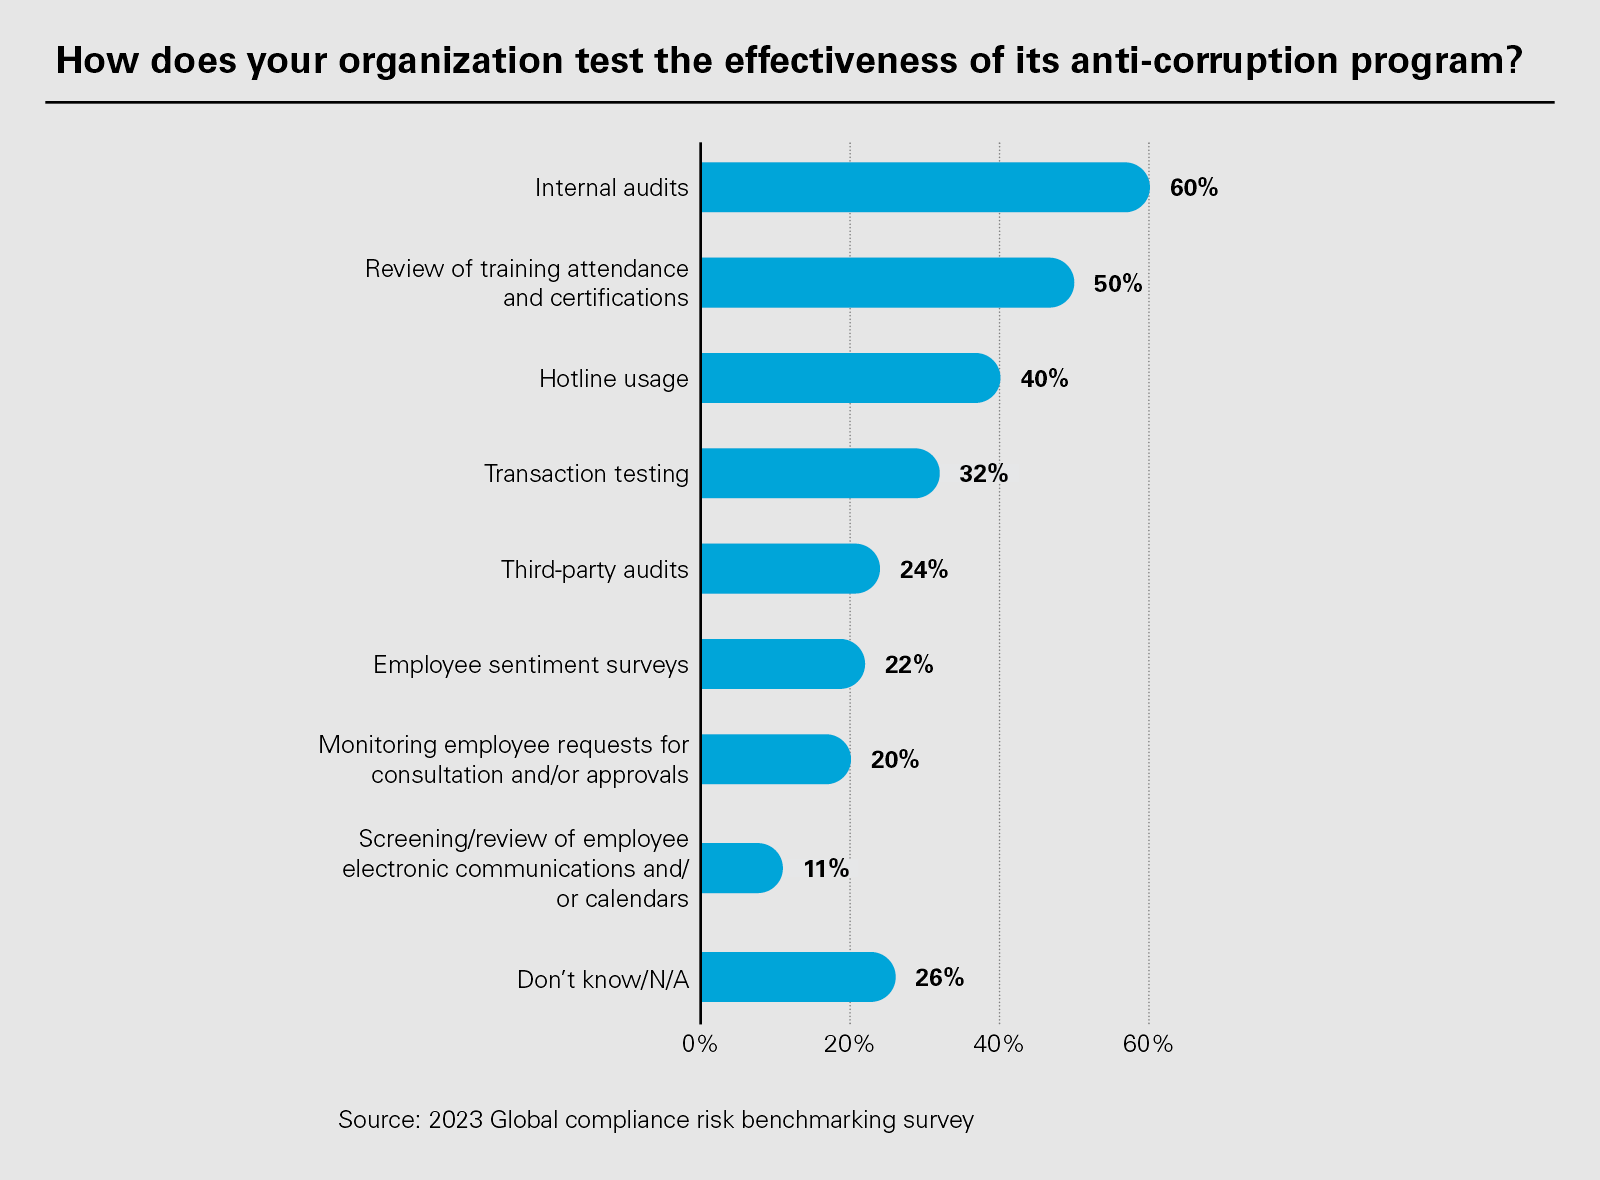 How does your organization test the effectiveness of its anti-corruption program?